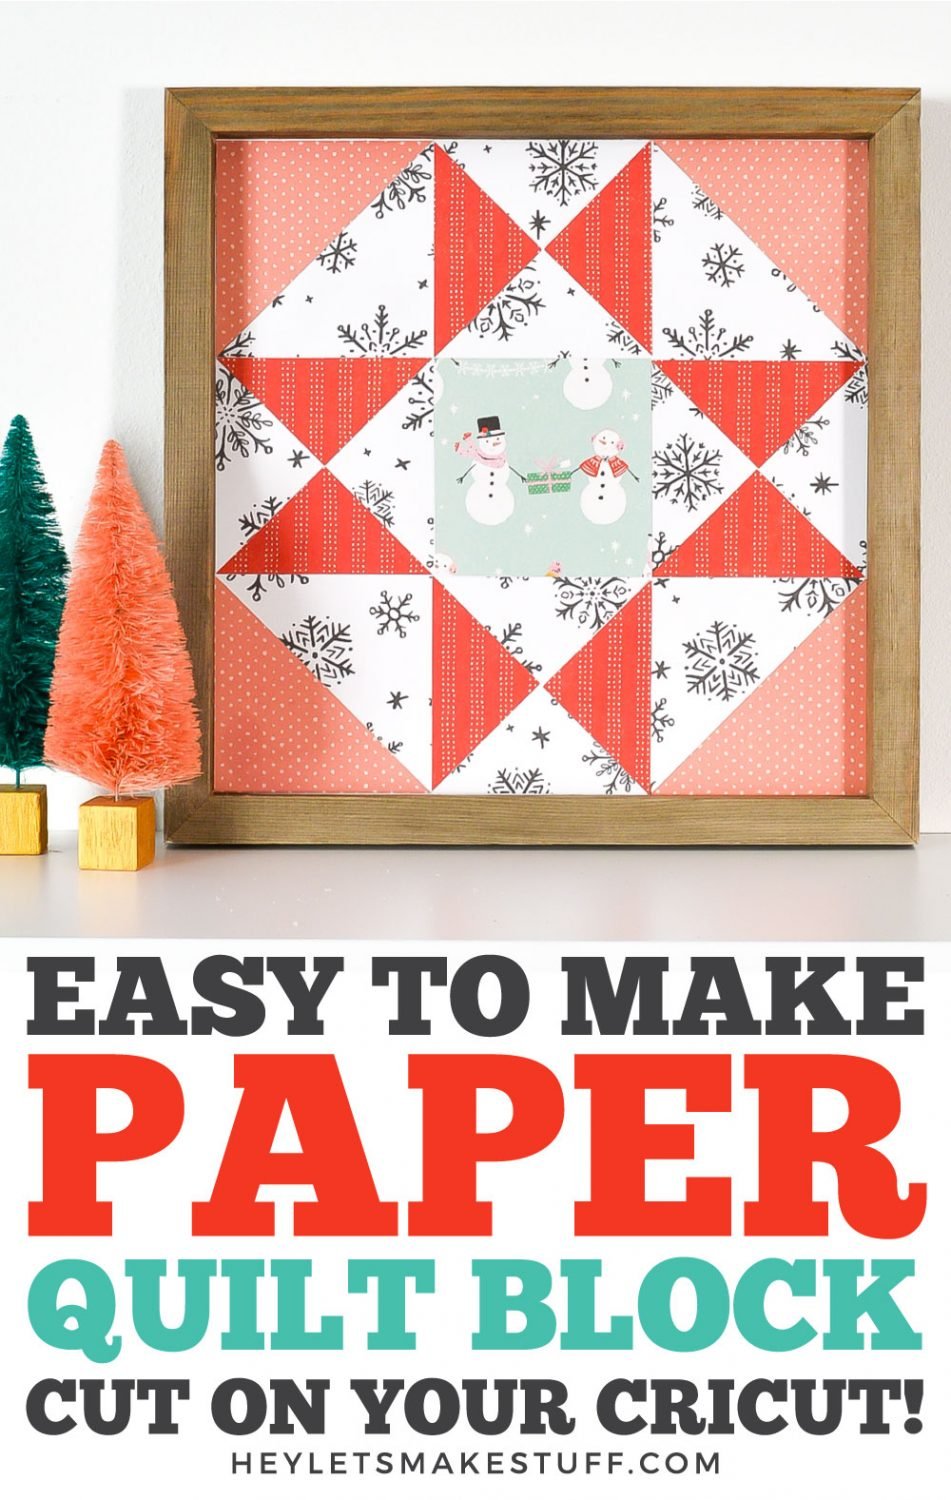 Pin image for Easy To Make Paper Quilt Block Cut On Your Cricut